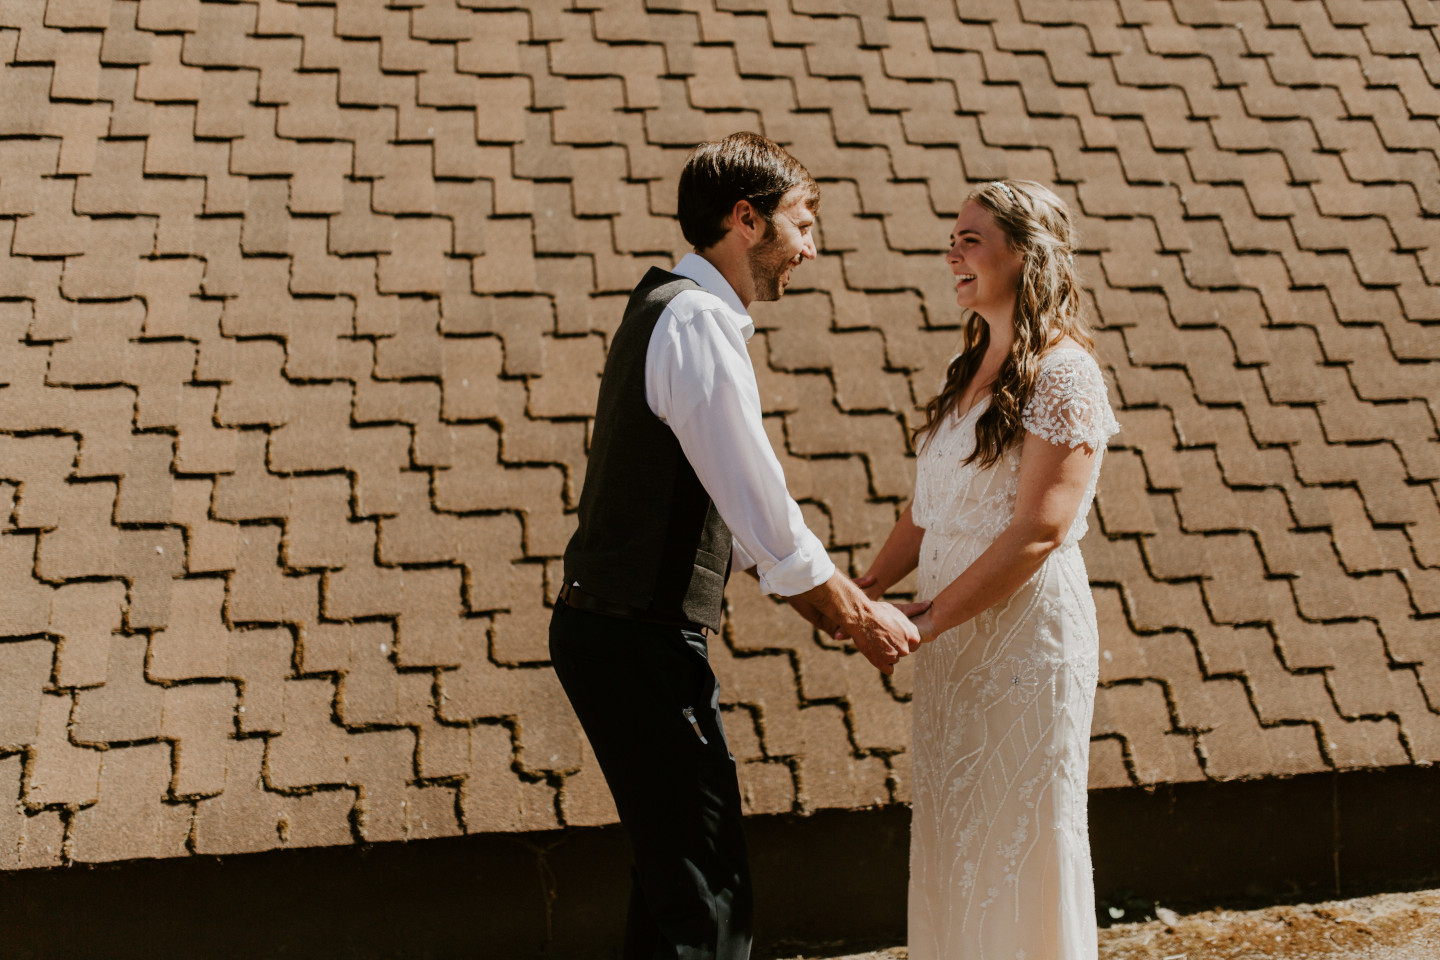 Hannah and Dan hold hands in Corvallis, Oregon. Intimate wedding photography in Corvallis Oregon by Sienna Plus Josh.